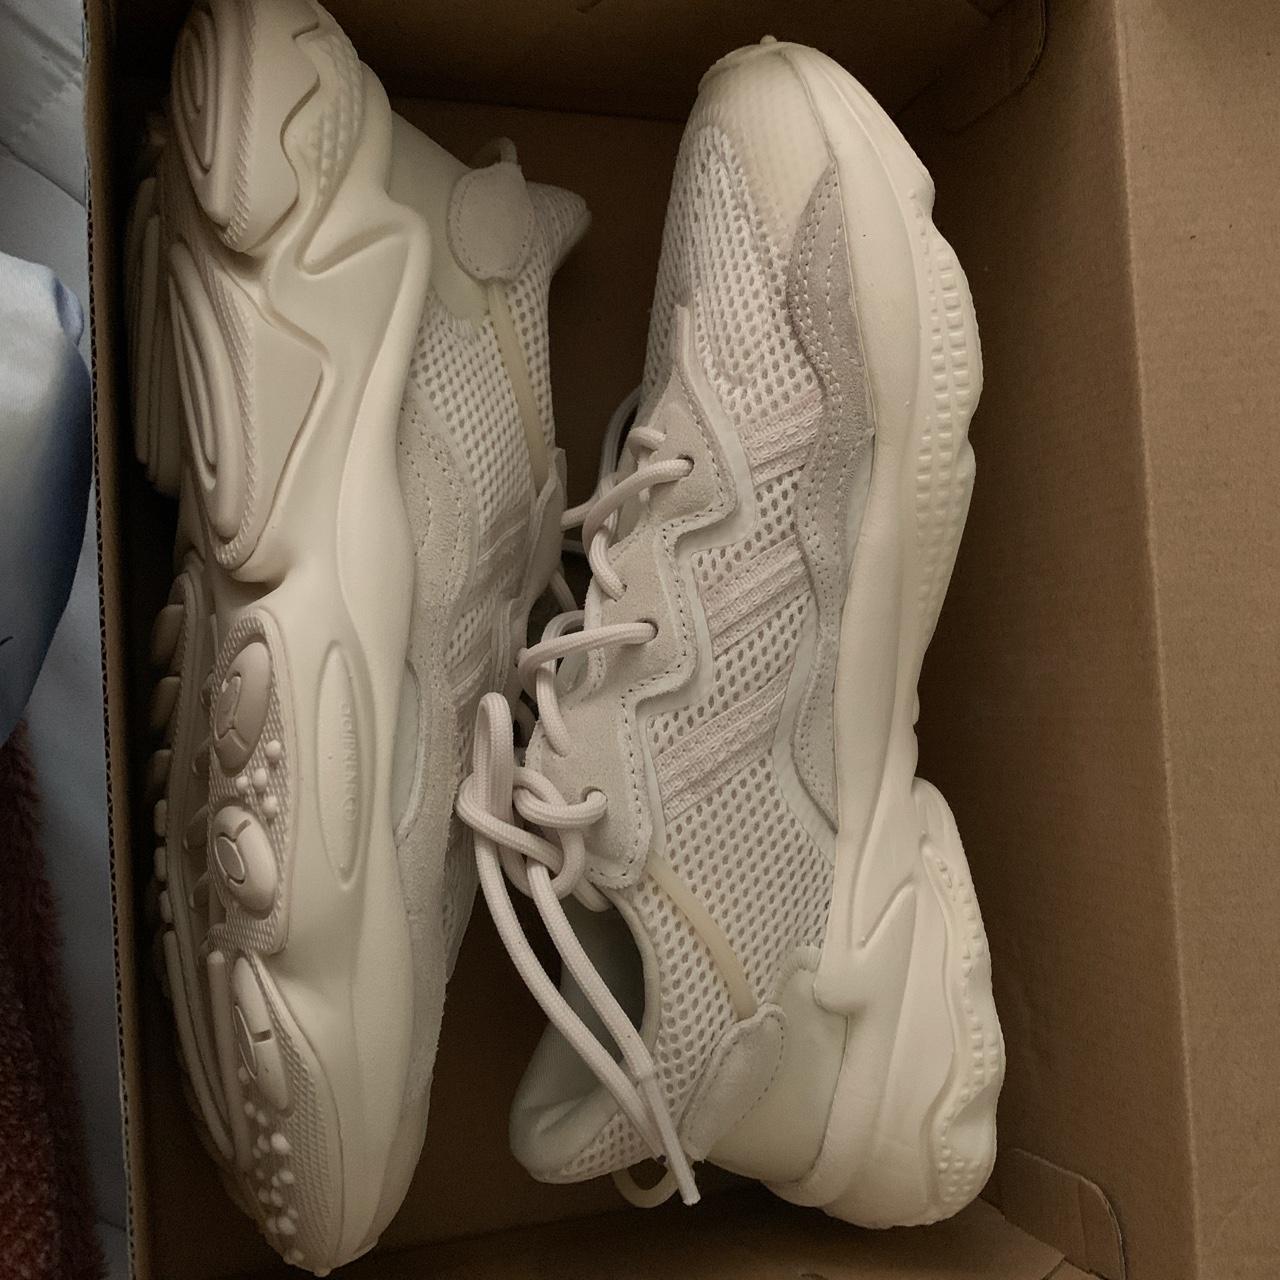 Product Image 1 - ADIDAS OZWEEGO SHOES👟
Brand New
Color Cream